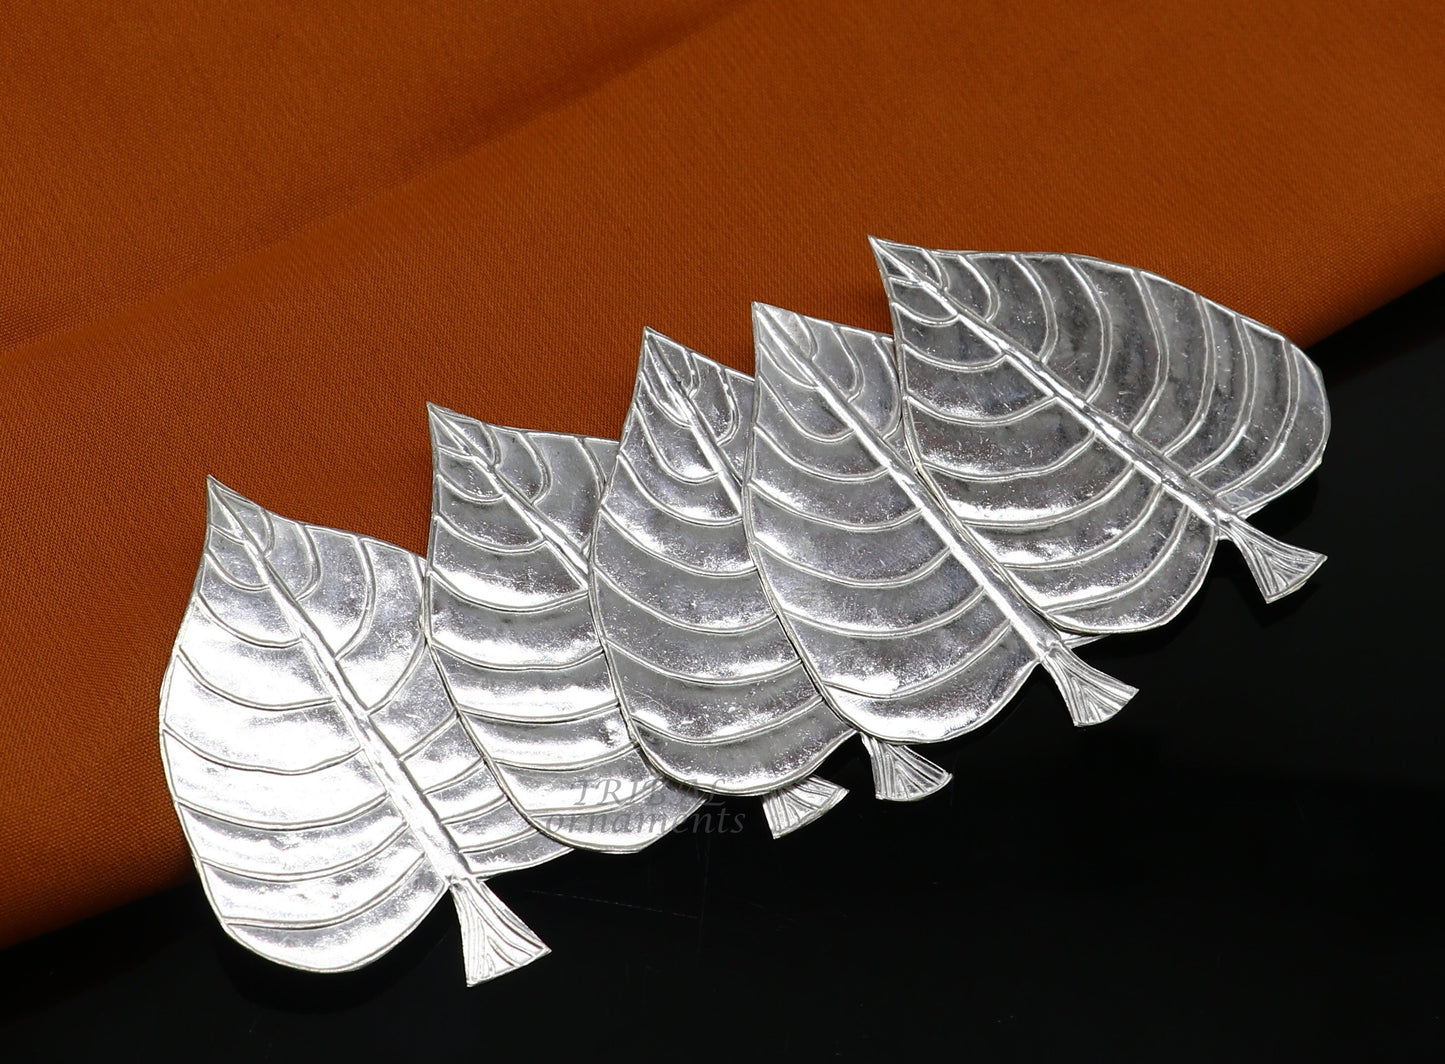 Lot 5 pieces 925 sterling silver handmade pipal leaf, best puja article , silver article su945 - TRIBAL ORNAMENTS